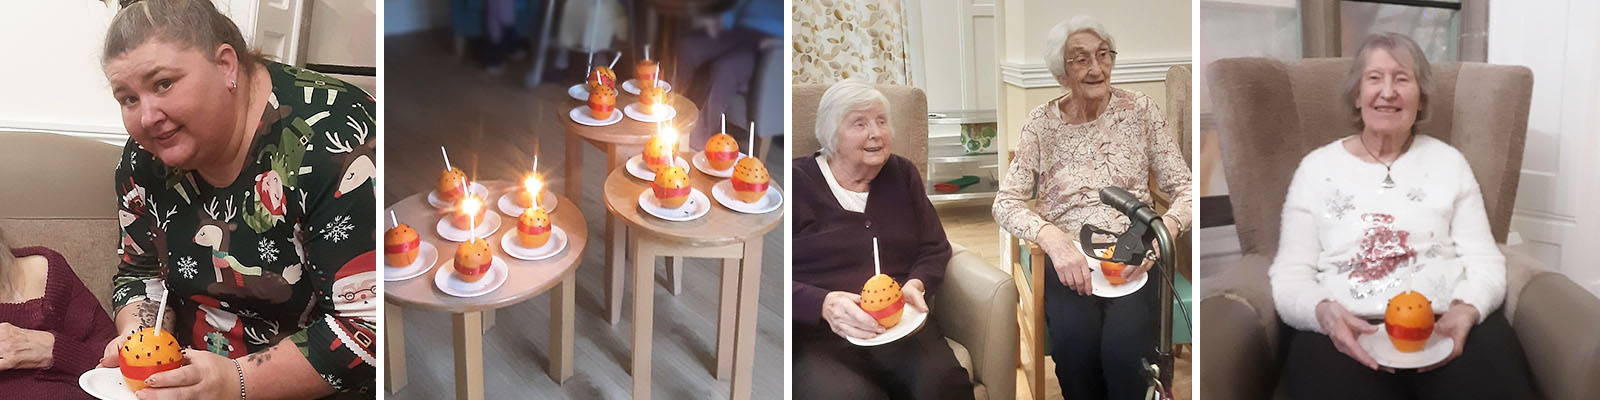 Christingle making at The Old Downs Residential Care Home